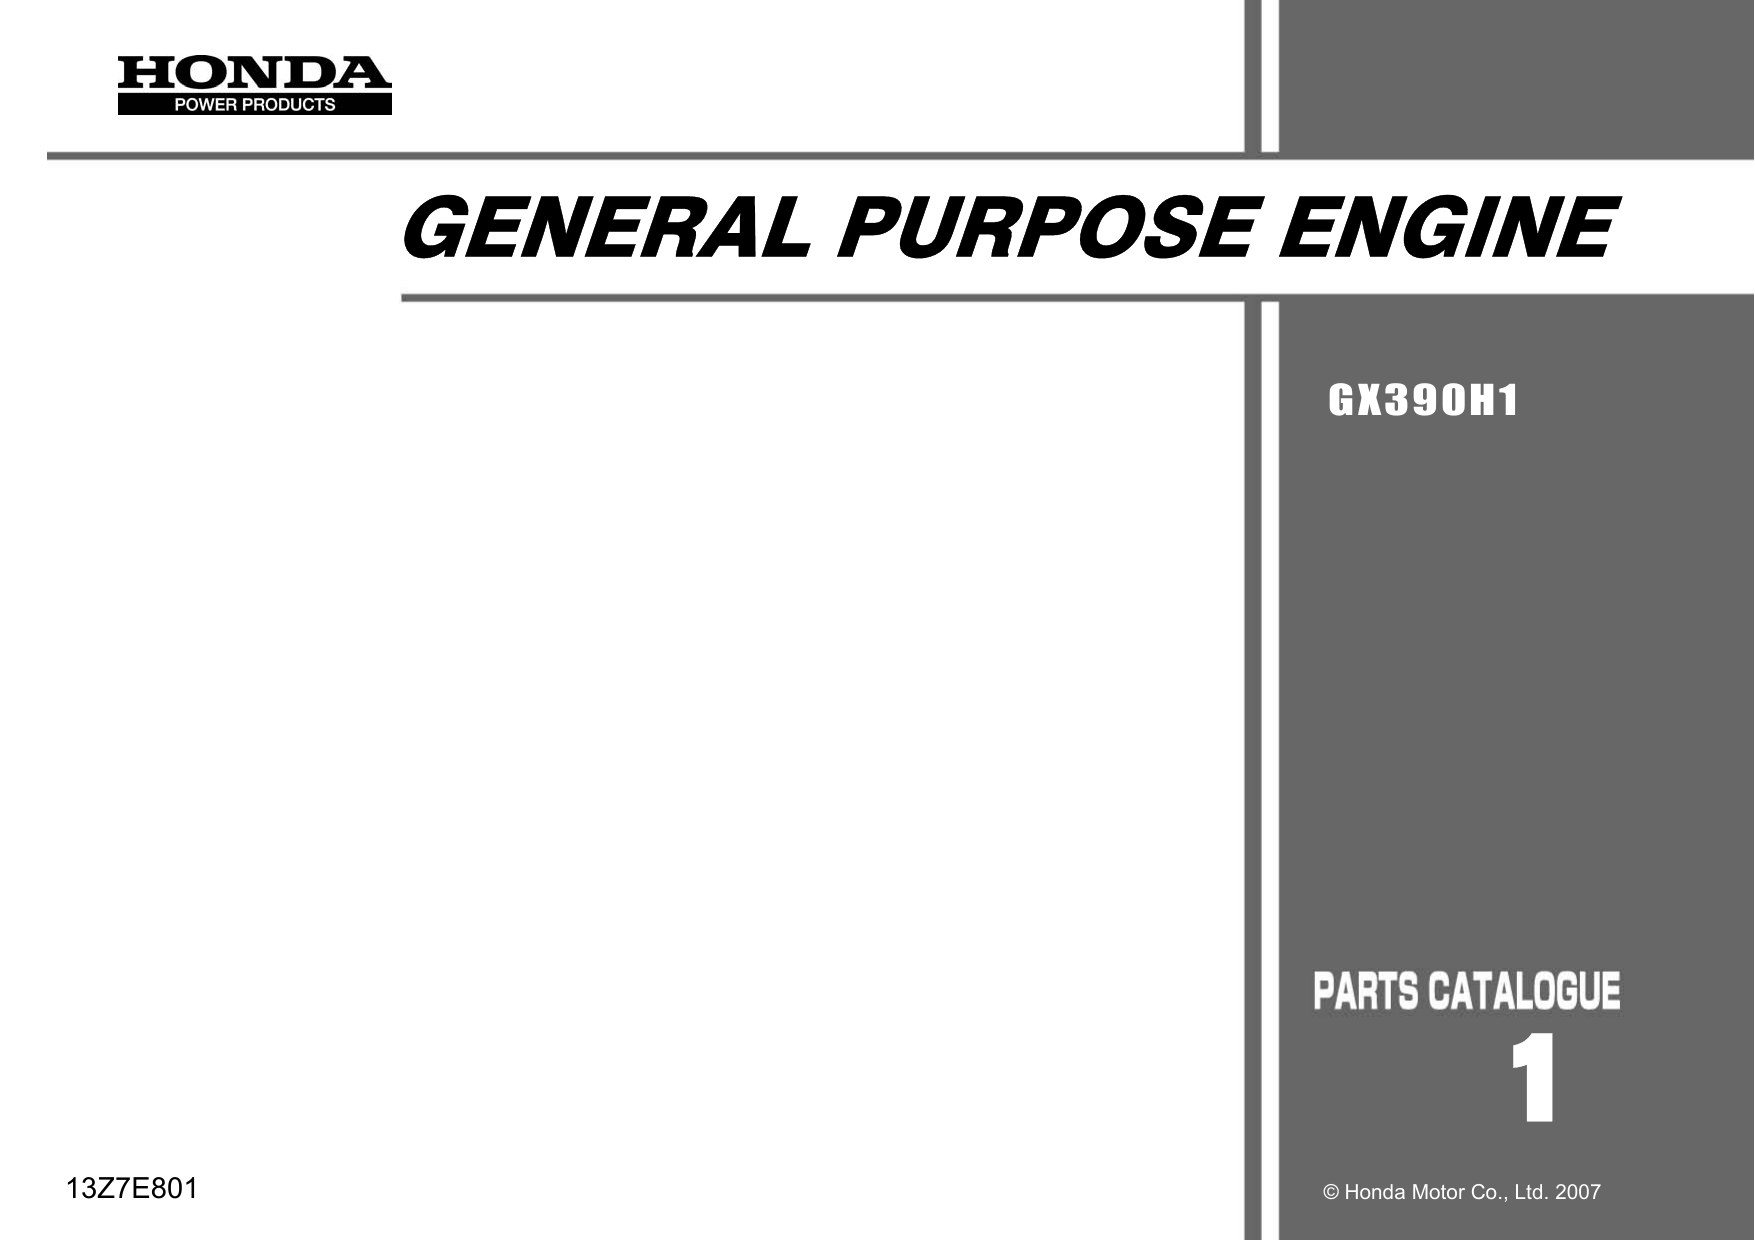 Honda GX390, GX390H1 GX390K1 GX390T1 GX390U1 GX390R1 GX390UH1 GX390UT1 GX390RT1, 13 hp engine parts catalog Preview image 2